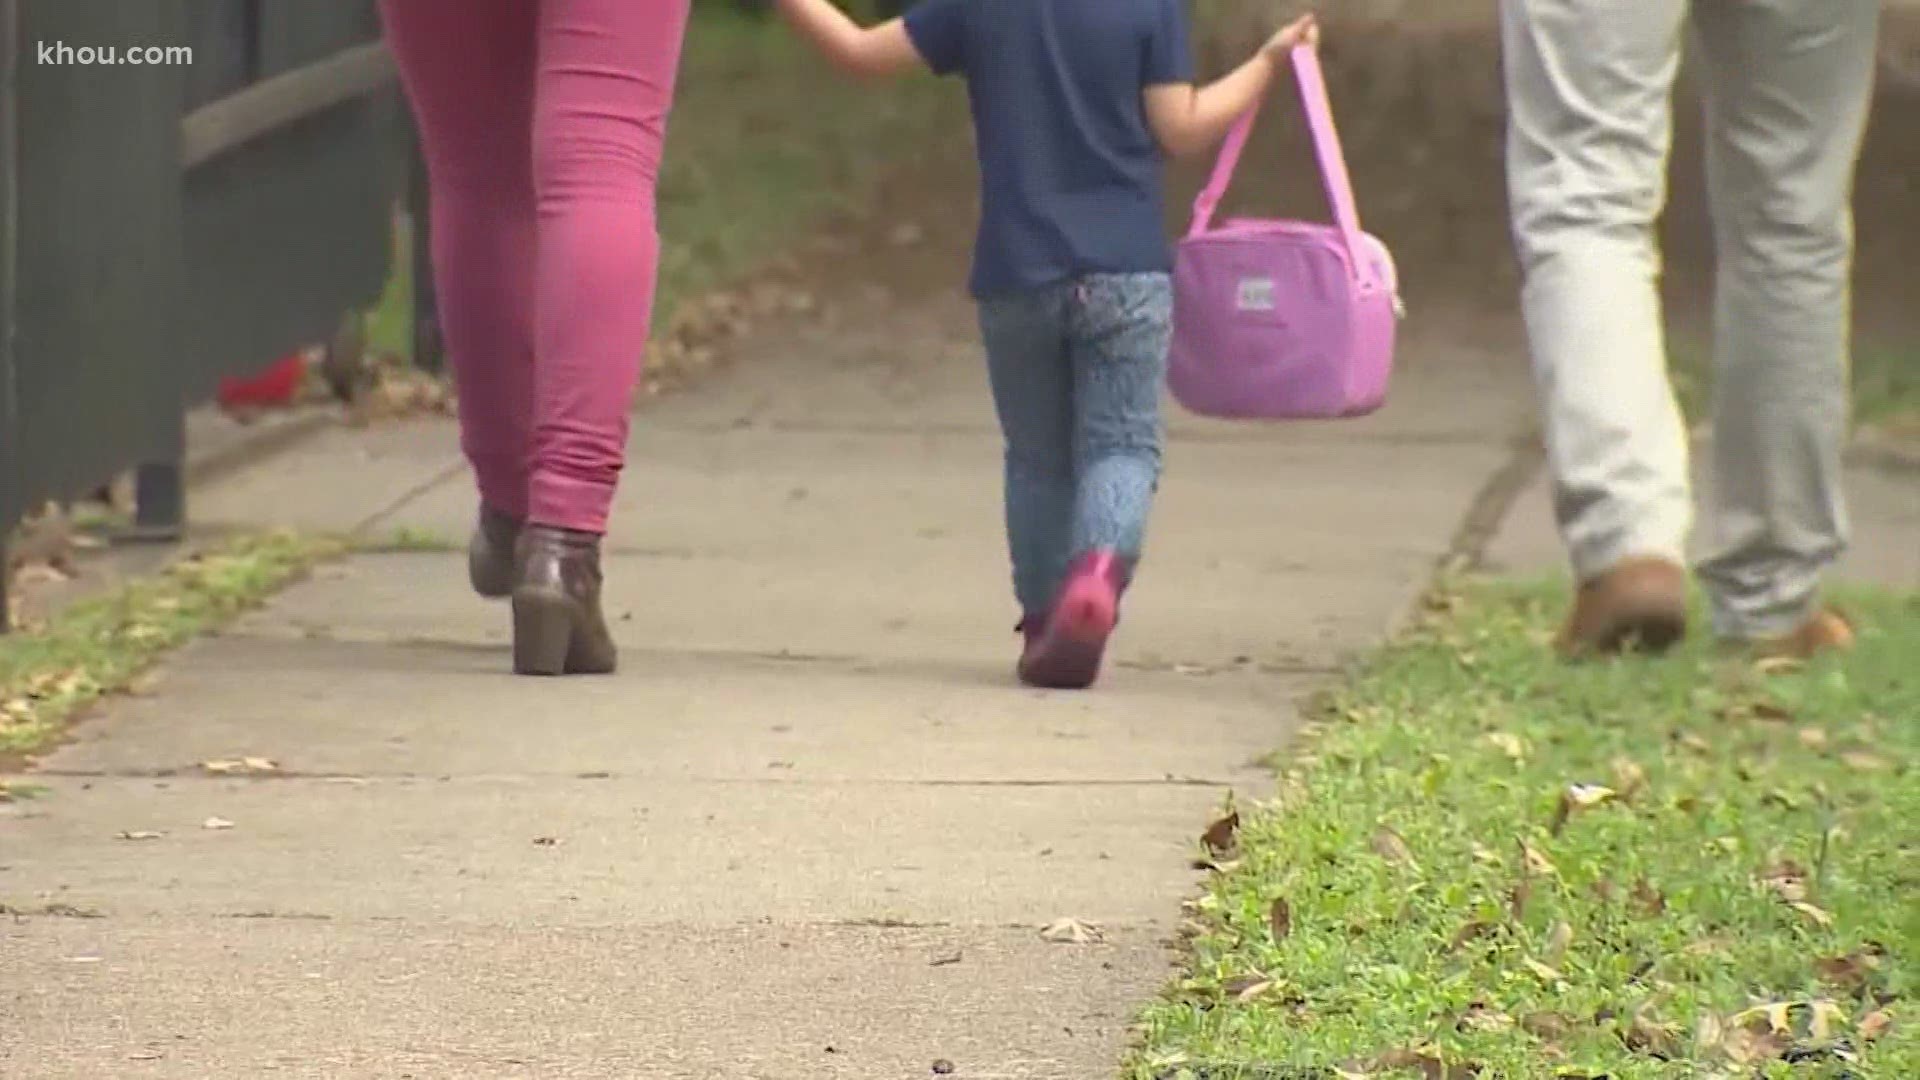 Texas officials released the restrictions and health protocols caregivers and parents must follow as day care centers begin to reopen May 18.